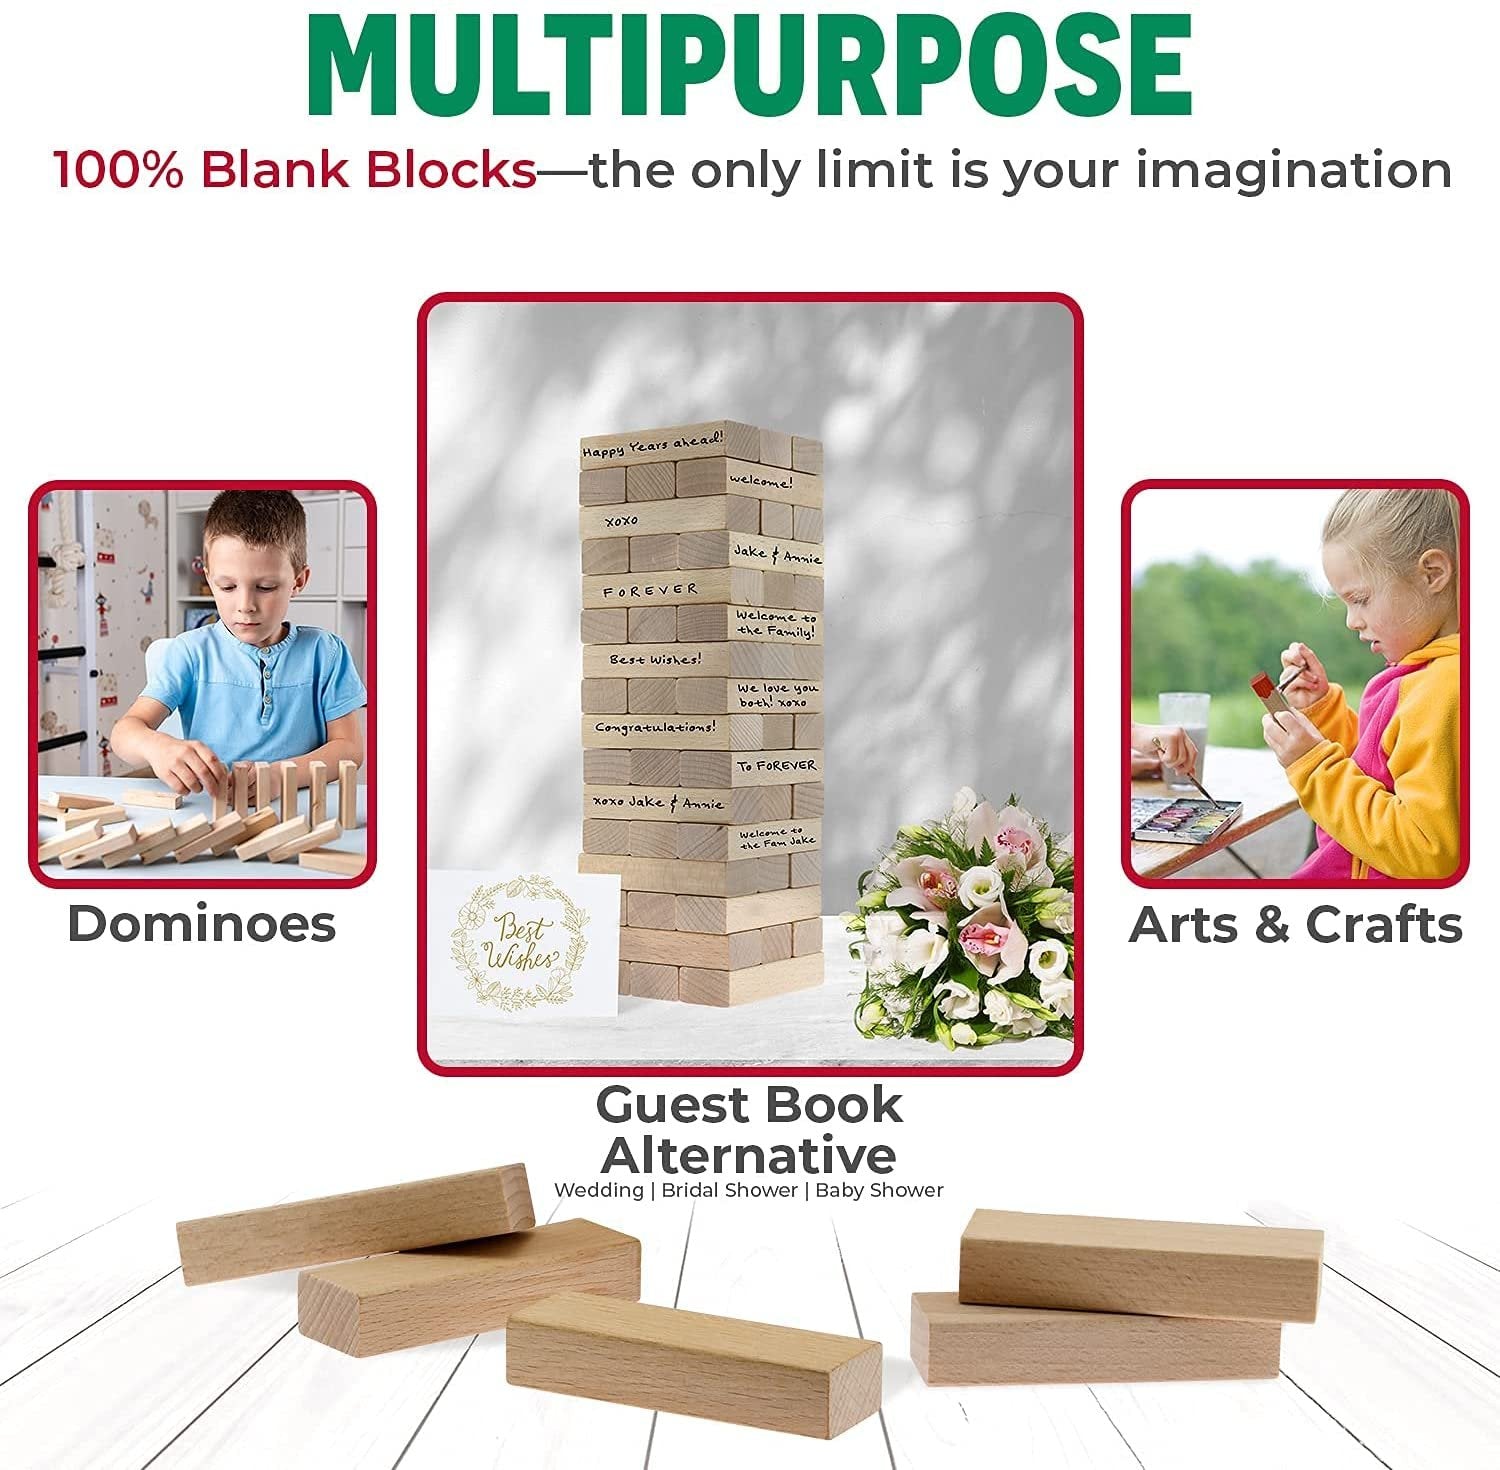 CoolToys Timber Tower Wood Block Stacking Game - Original Edition 48 Pieces - 1 Pack Size - Free Shipping